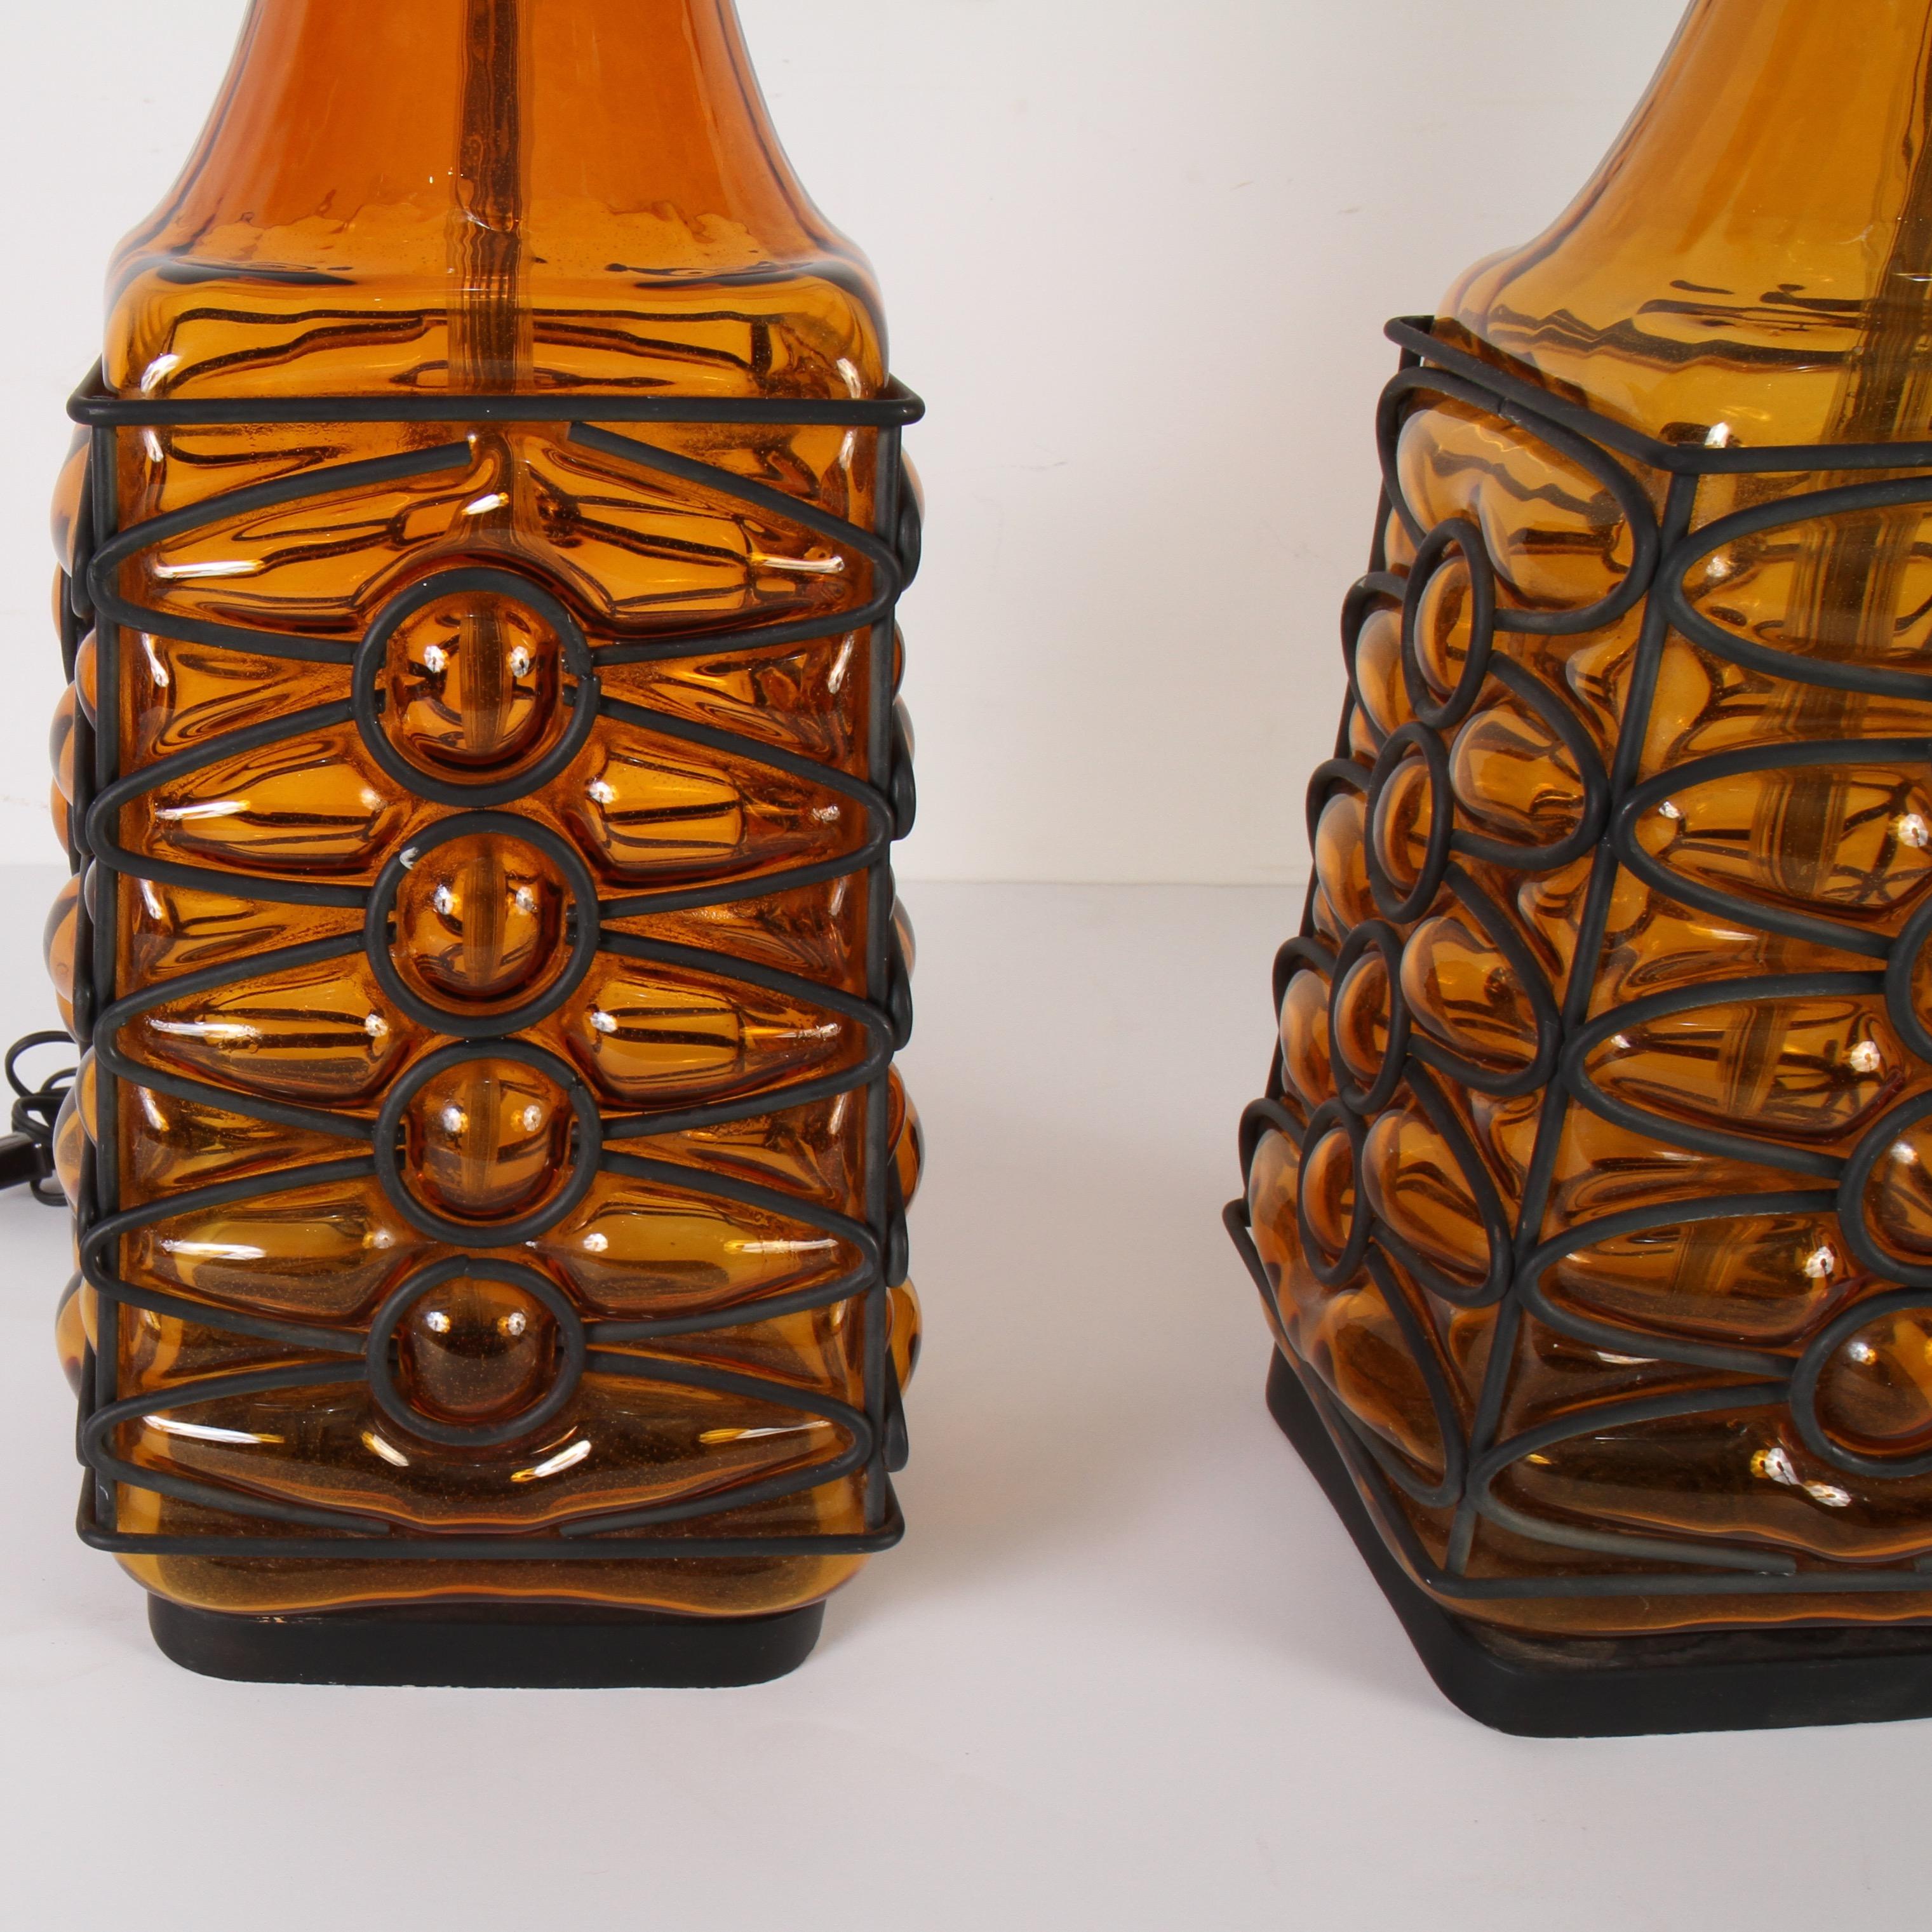 Artisans hand blow glass into a metal fretwork to create this lamp’s intriguing texture. The blackend metal provides a handsome contrast to the orange glass. These are most likely from the sixties or seventies.